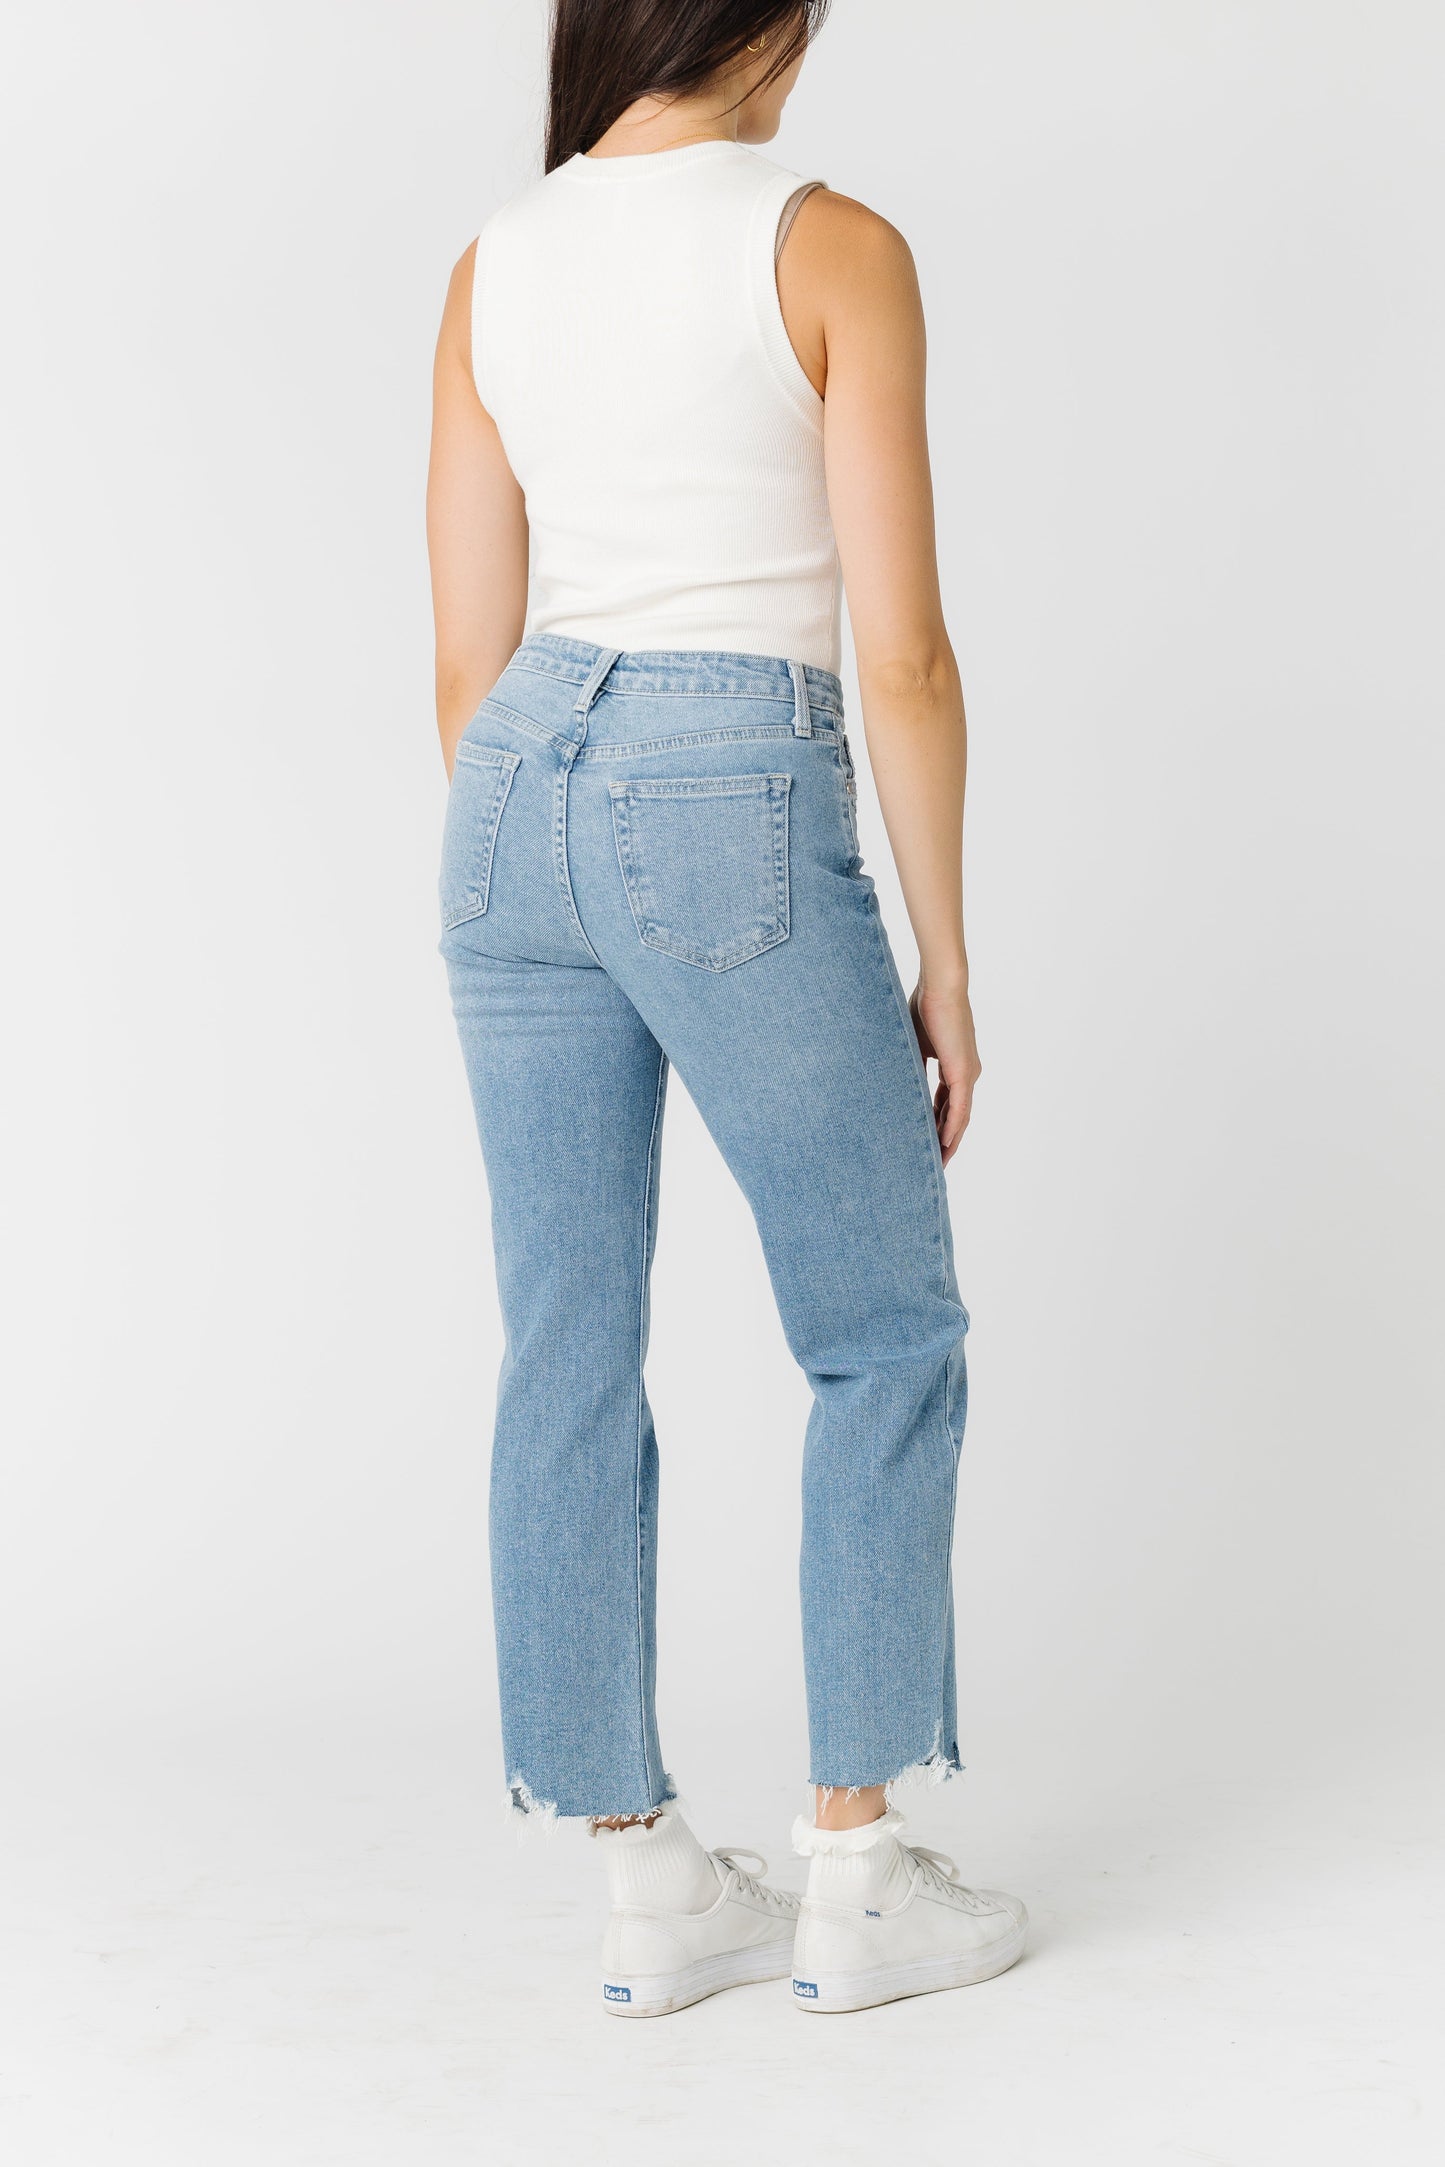 Lost In Time Vintage Straight Jeans WOMEN'S DENIM Just Panmaco Inc. 